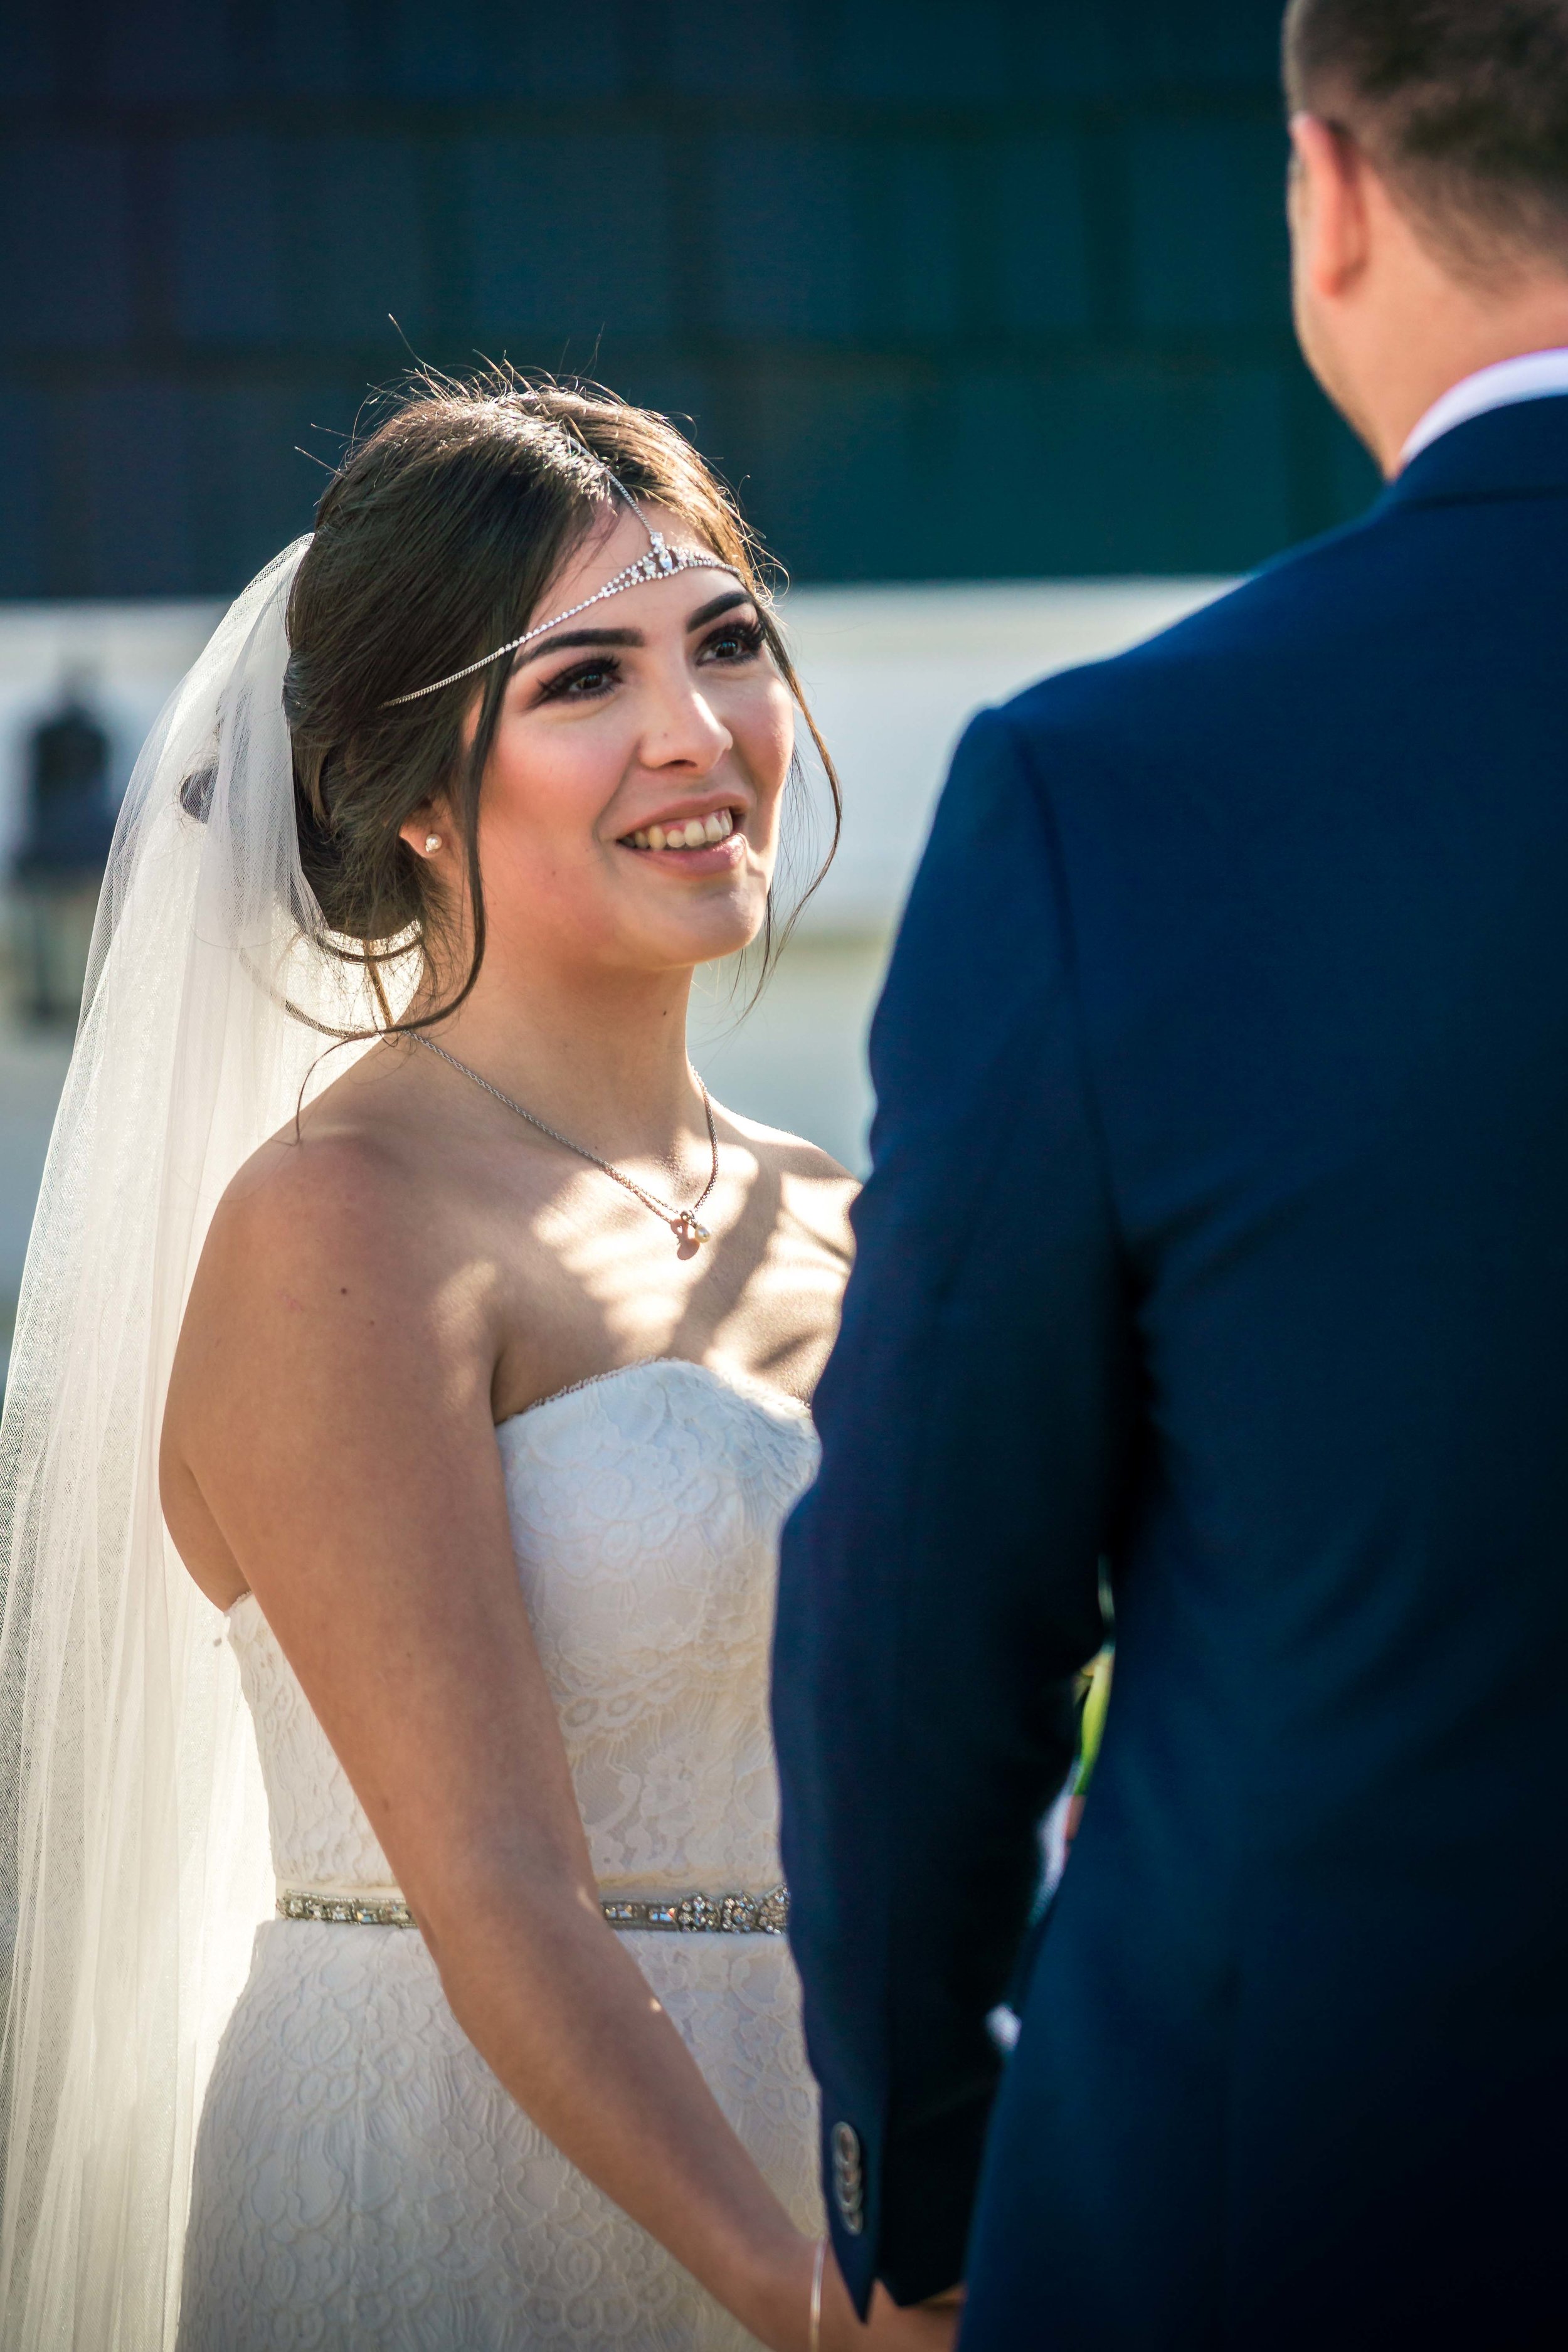 The bride and groom looking at each other in love at the altar during their wedding ceremony in Balboa Island